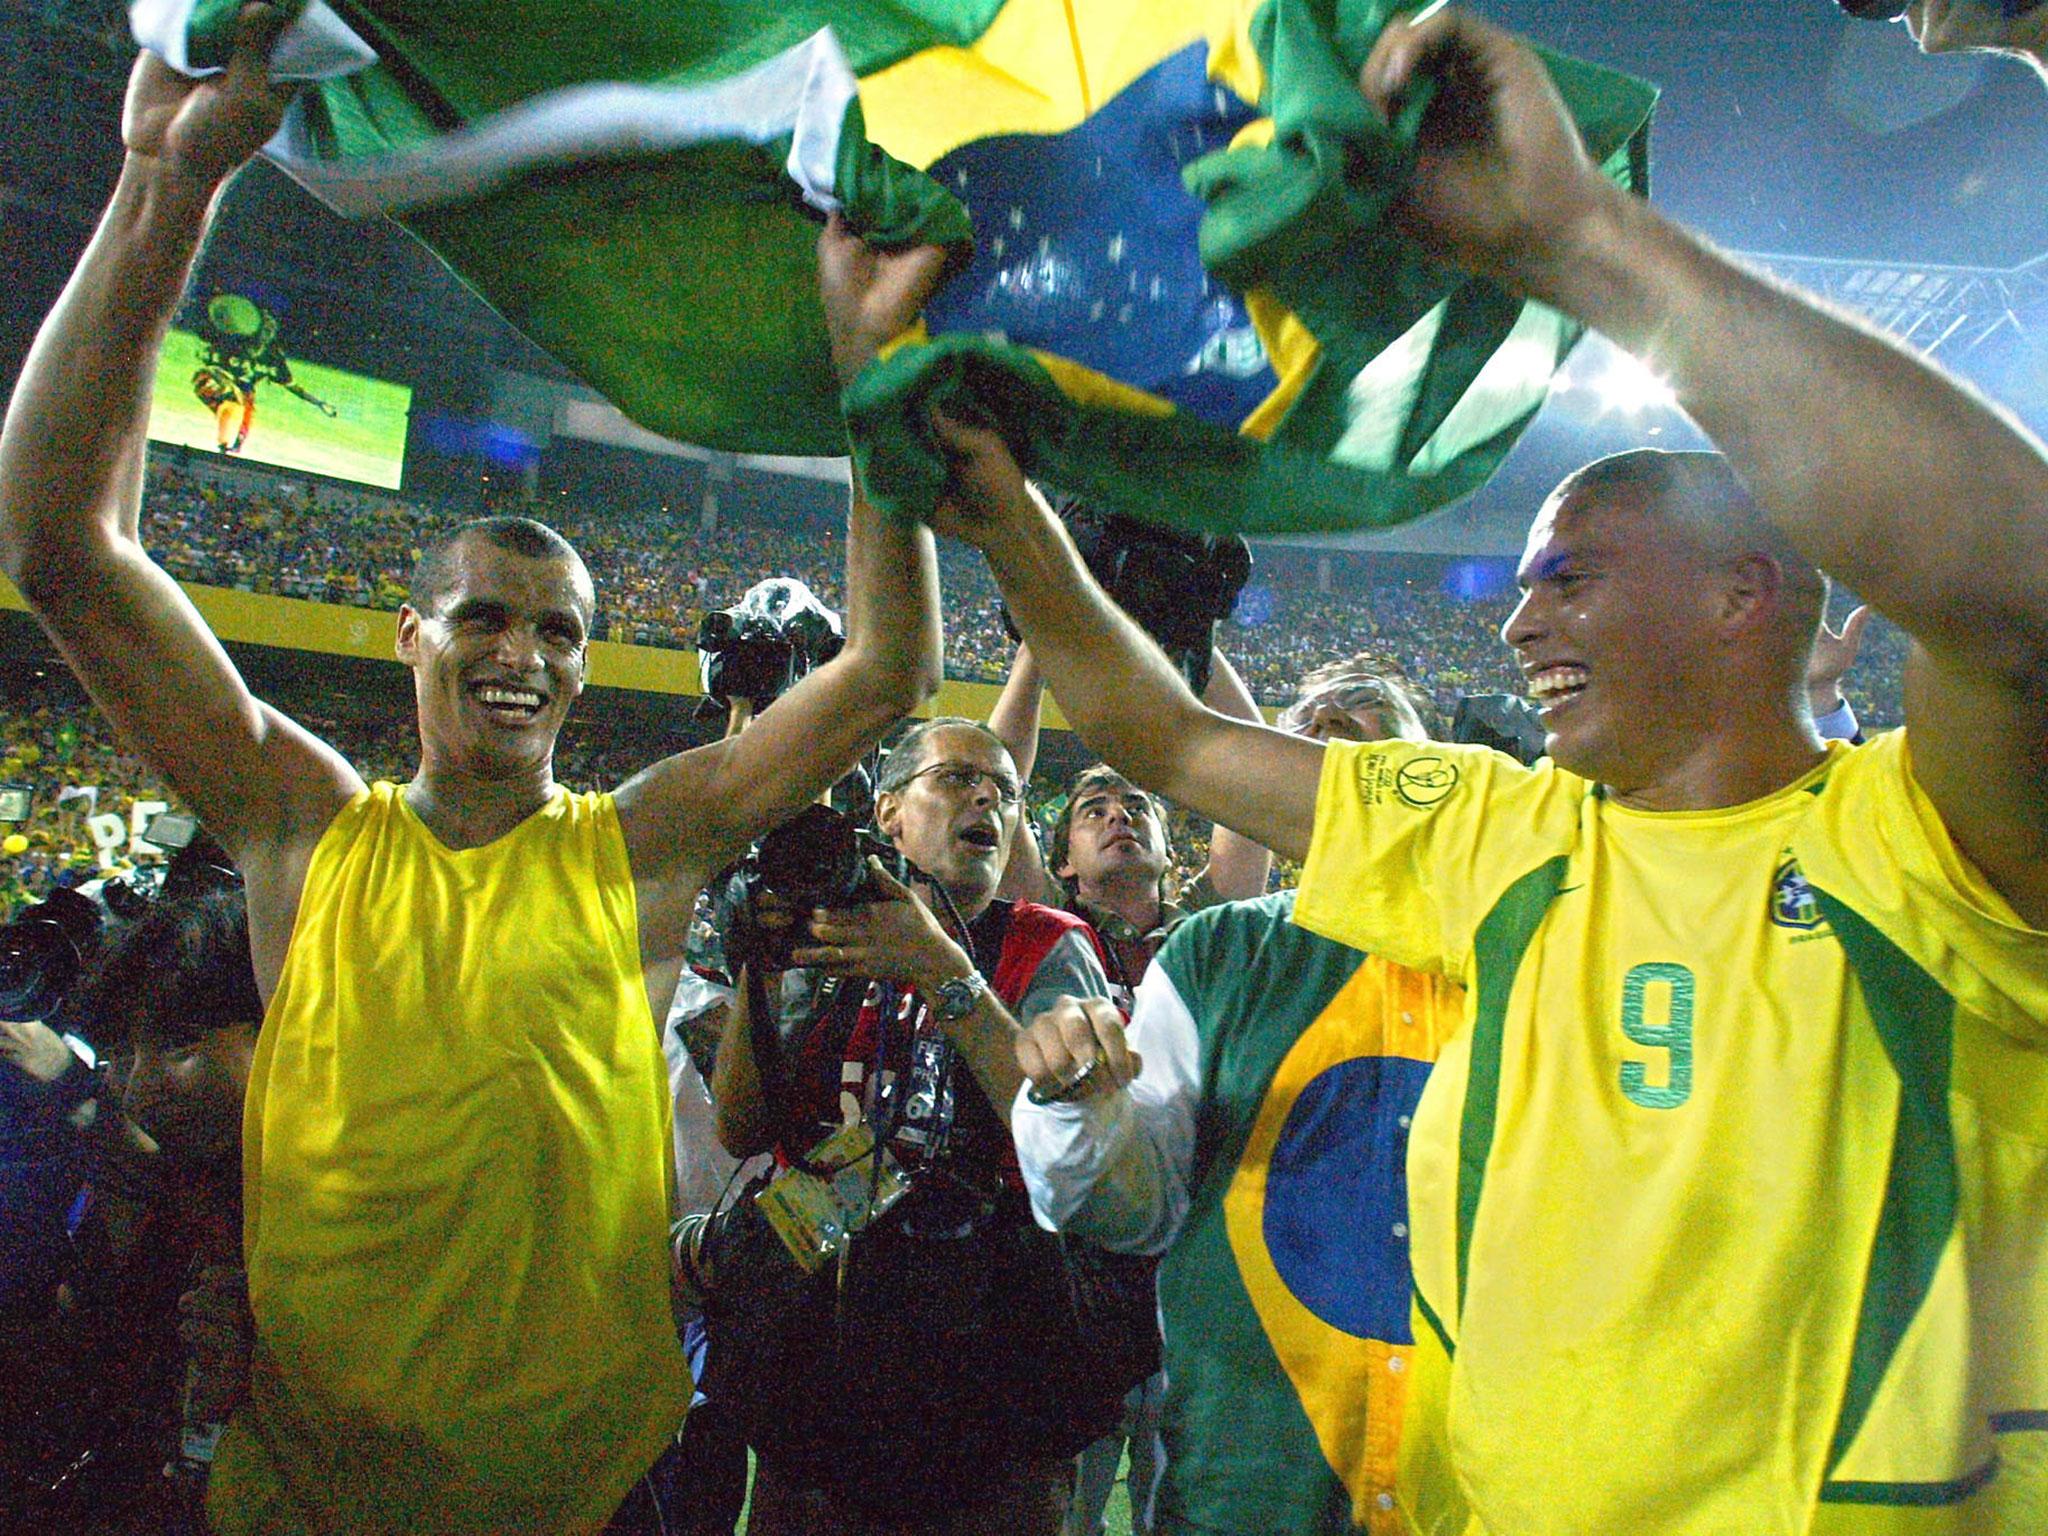 The 2002 World Cup was marked by upsets before Brazil triumphed